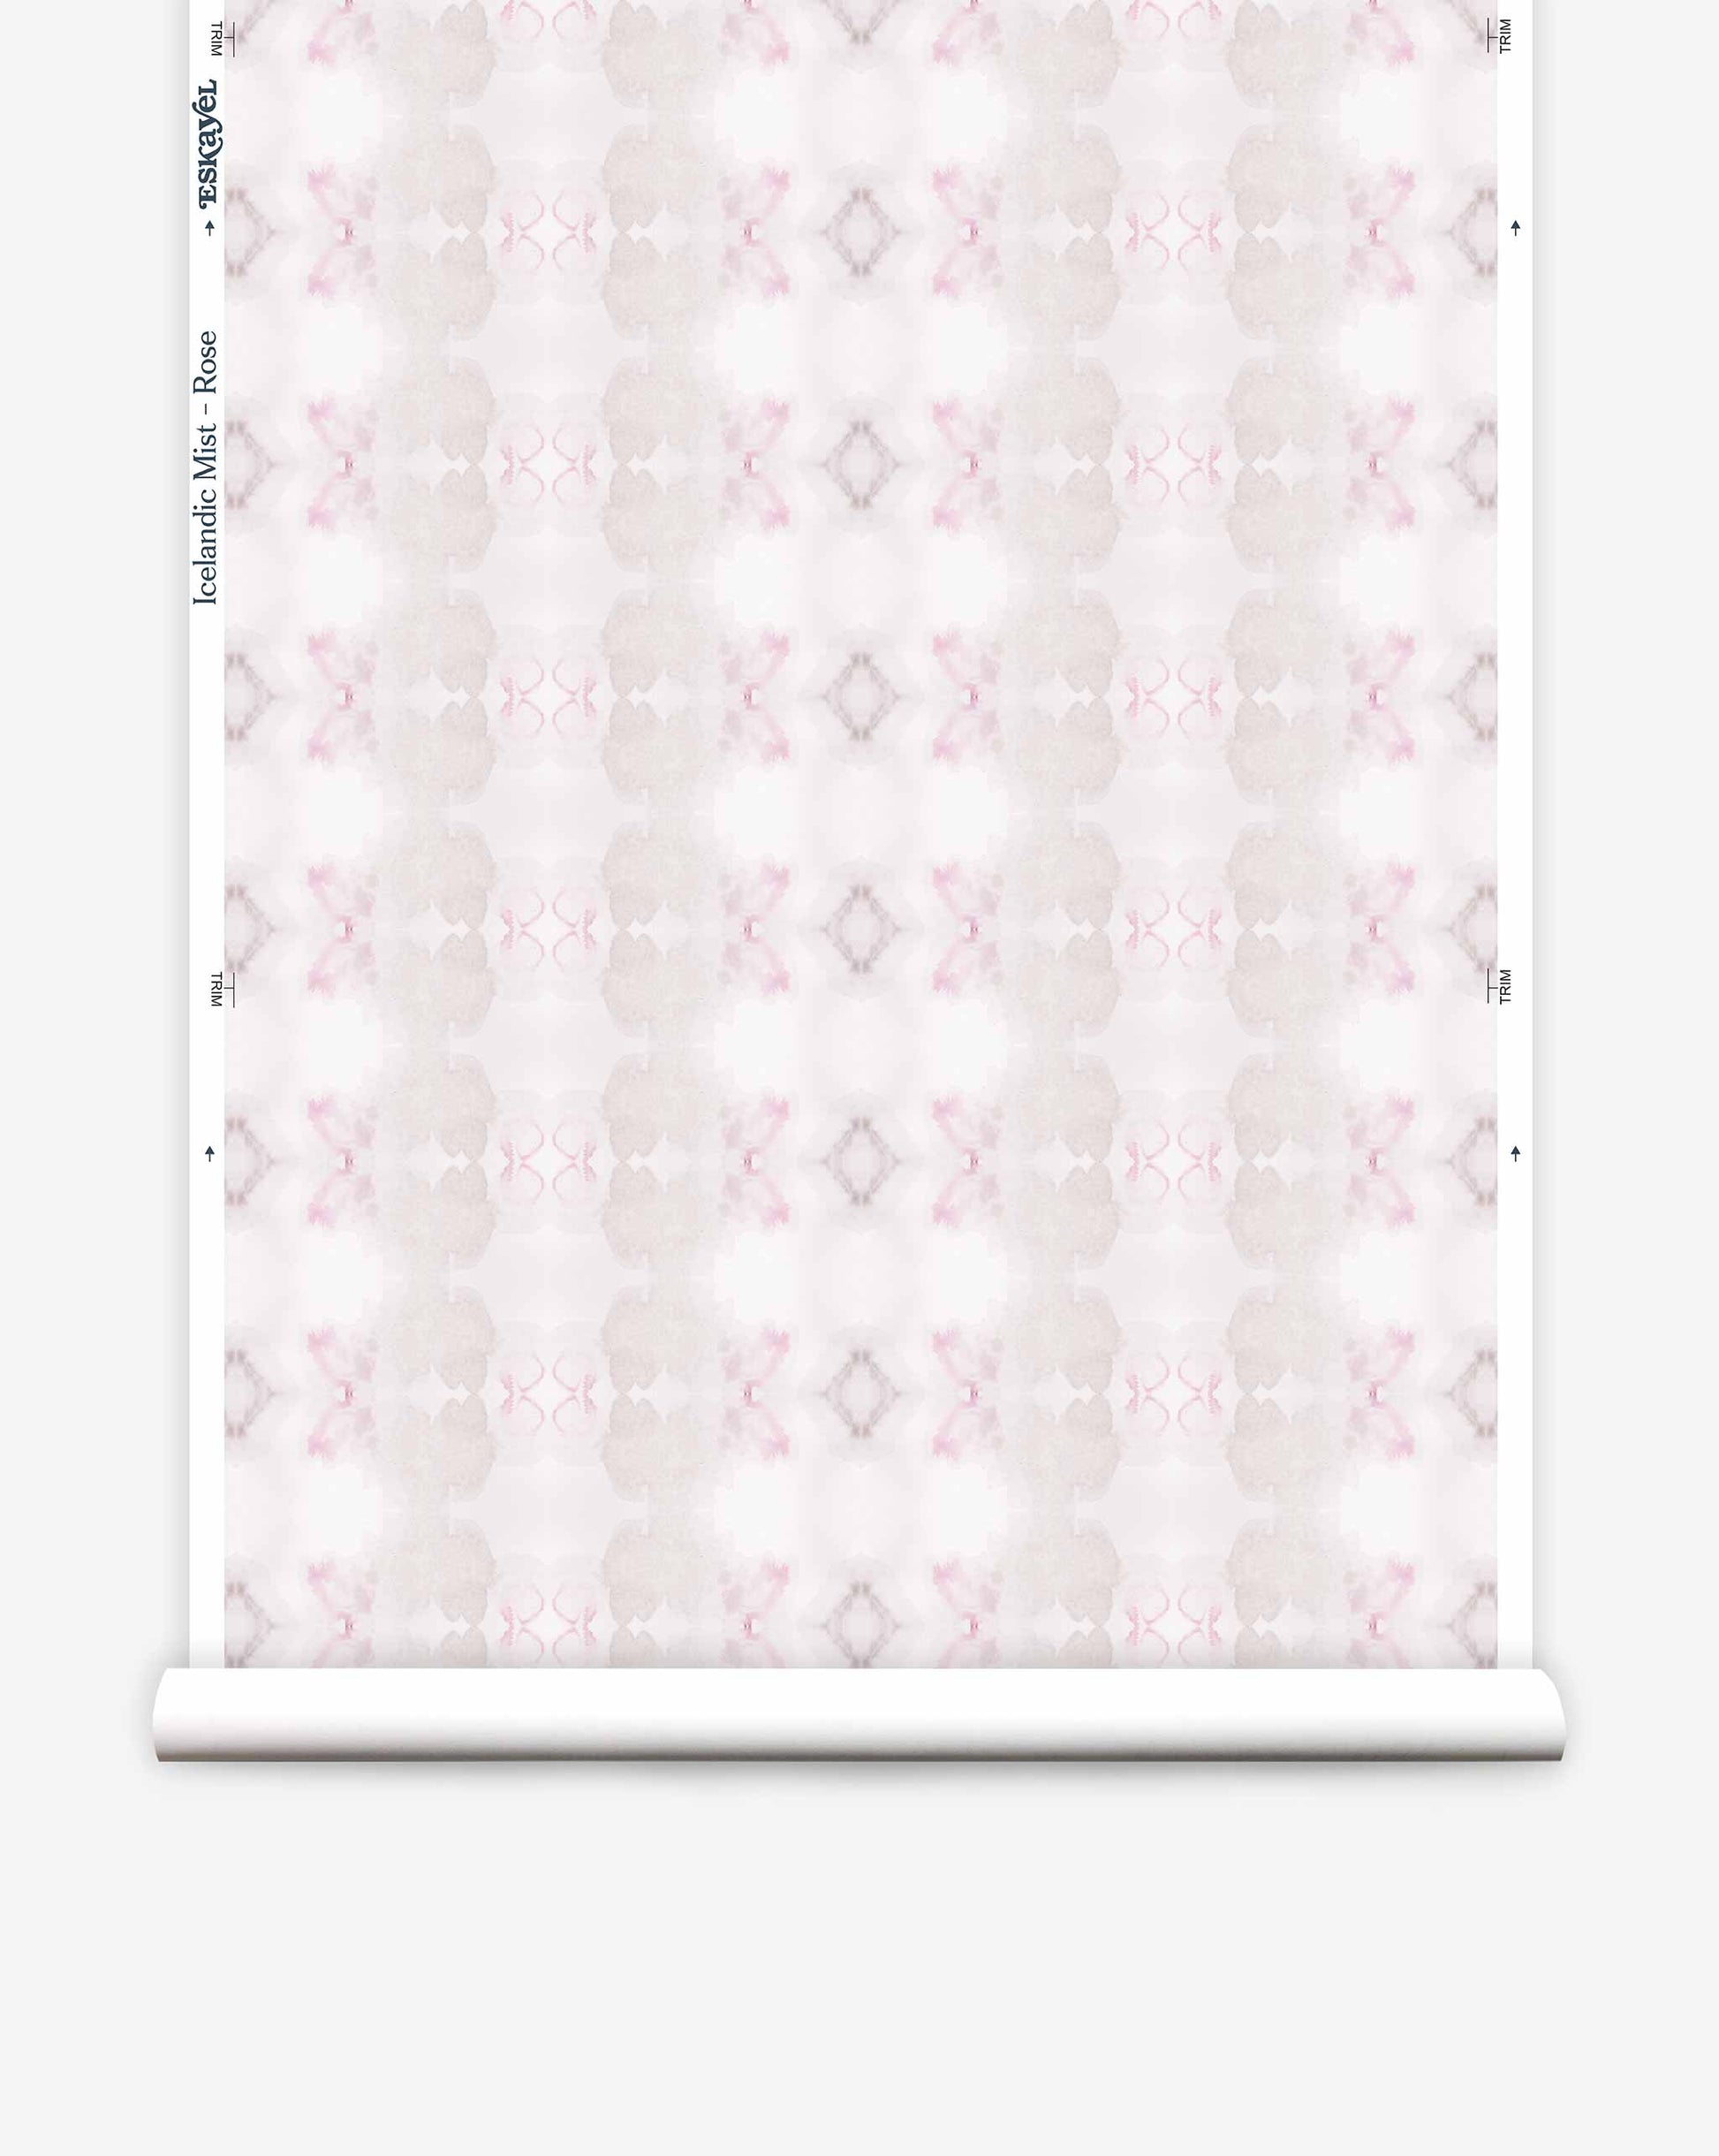 Icelandic Mist Wallpaper roll featuring a pink and white geometric floral pattern displayed against an Icelandic Mist background, viewed rolled out.